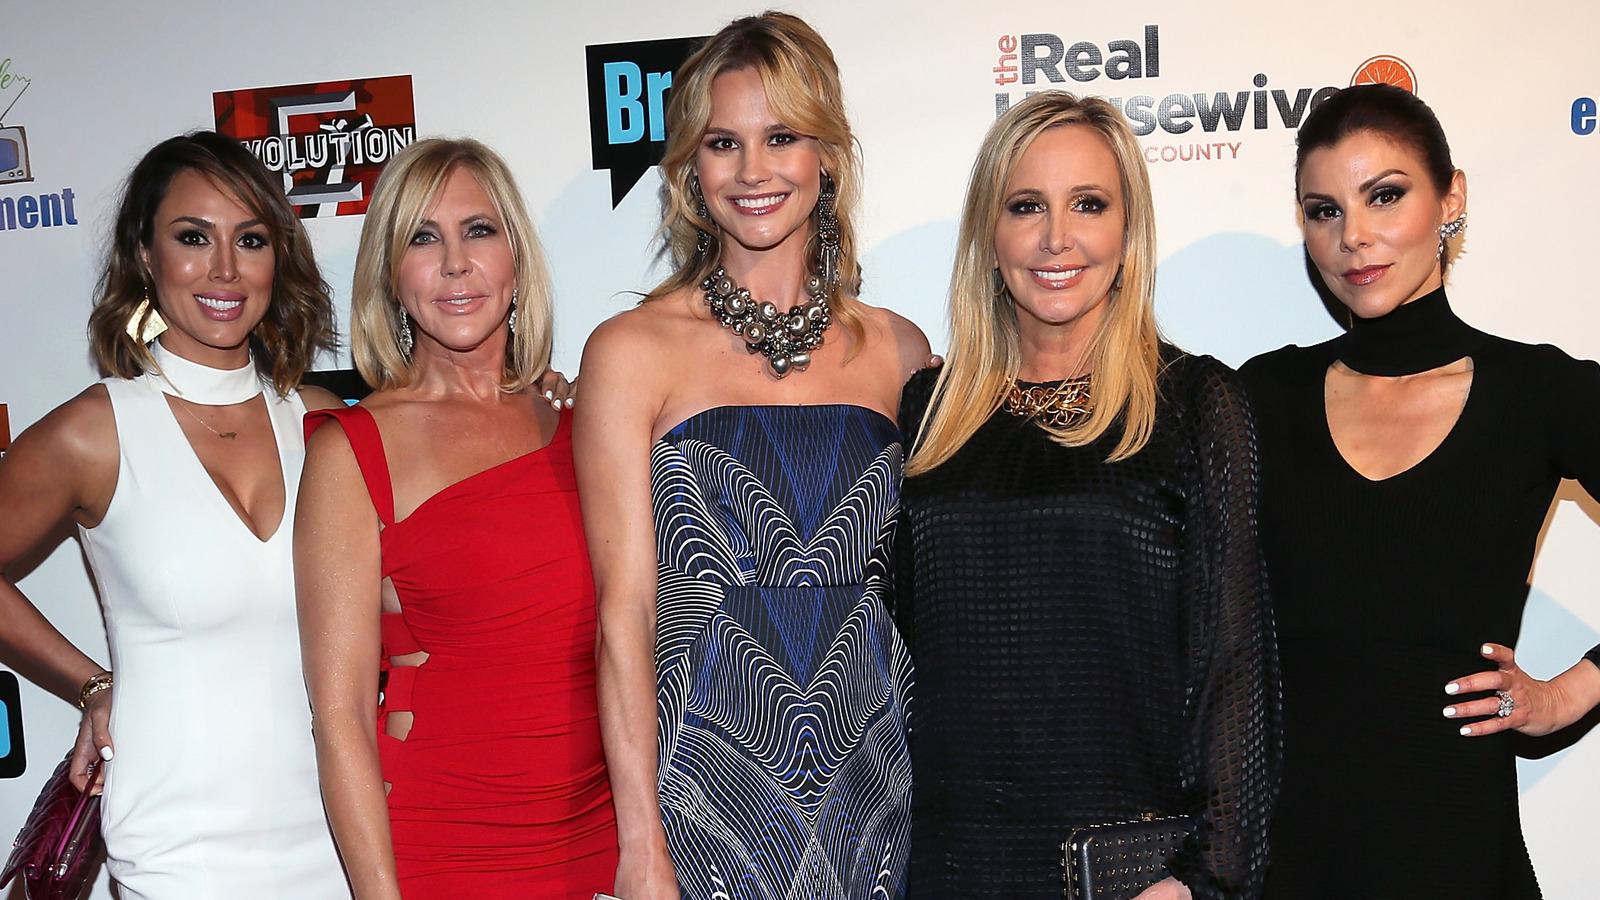 Who Is The Richest Housewife From Real Housewives Of Orange County?